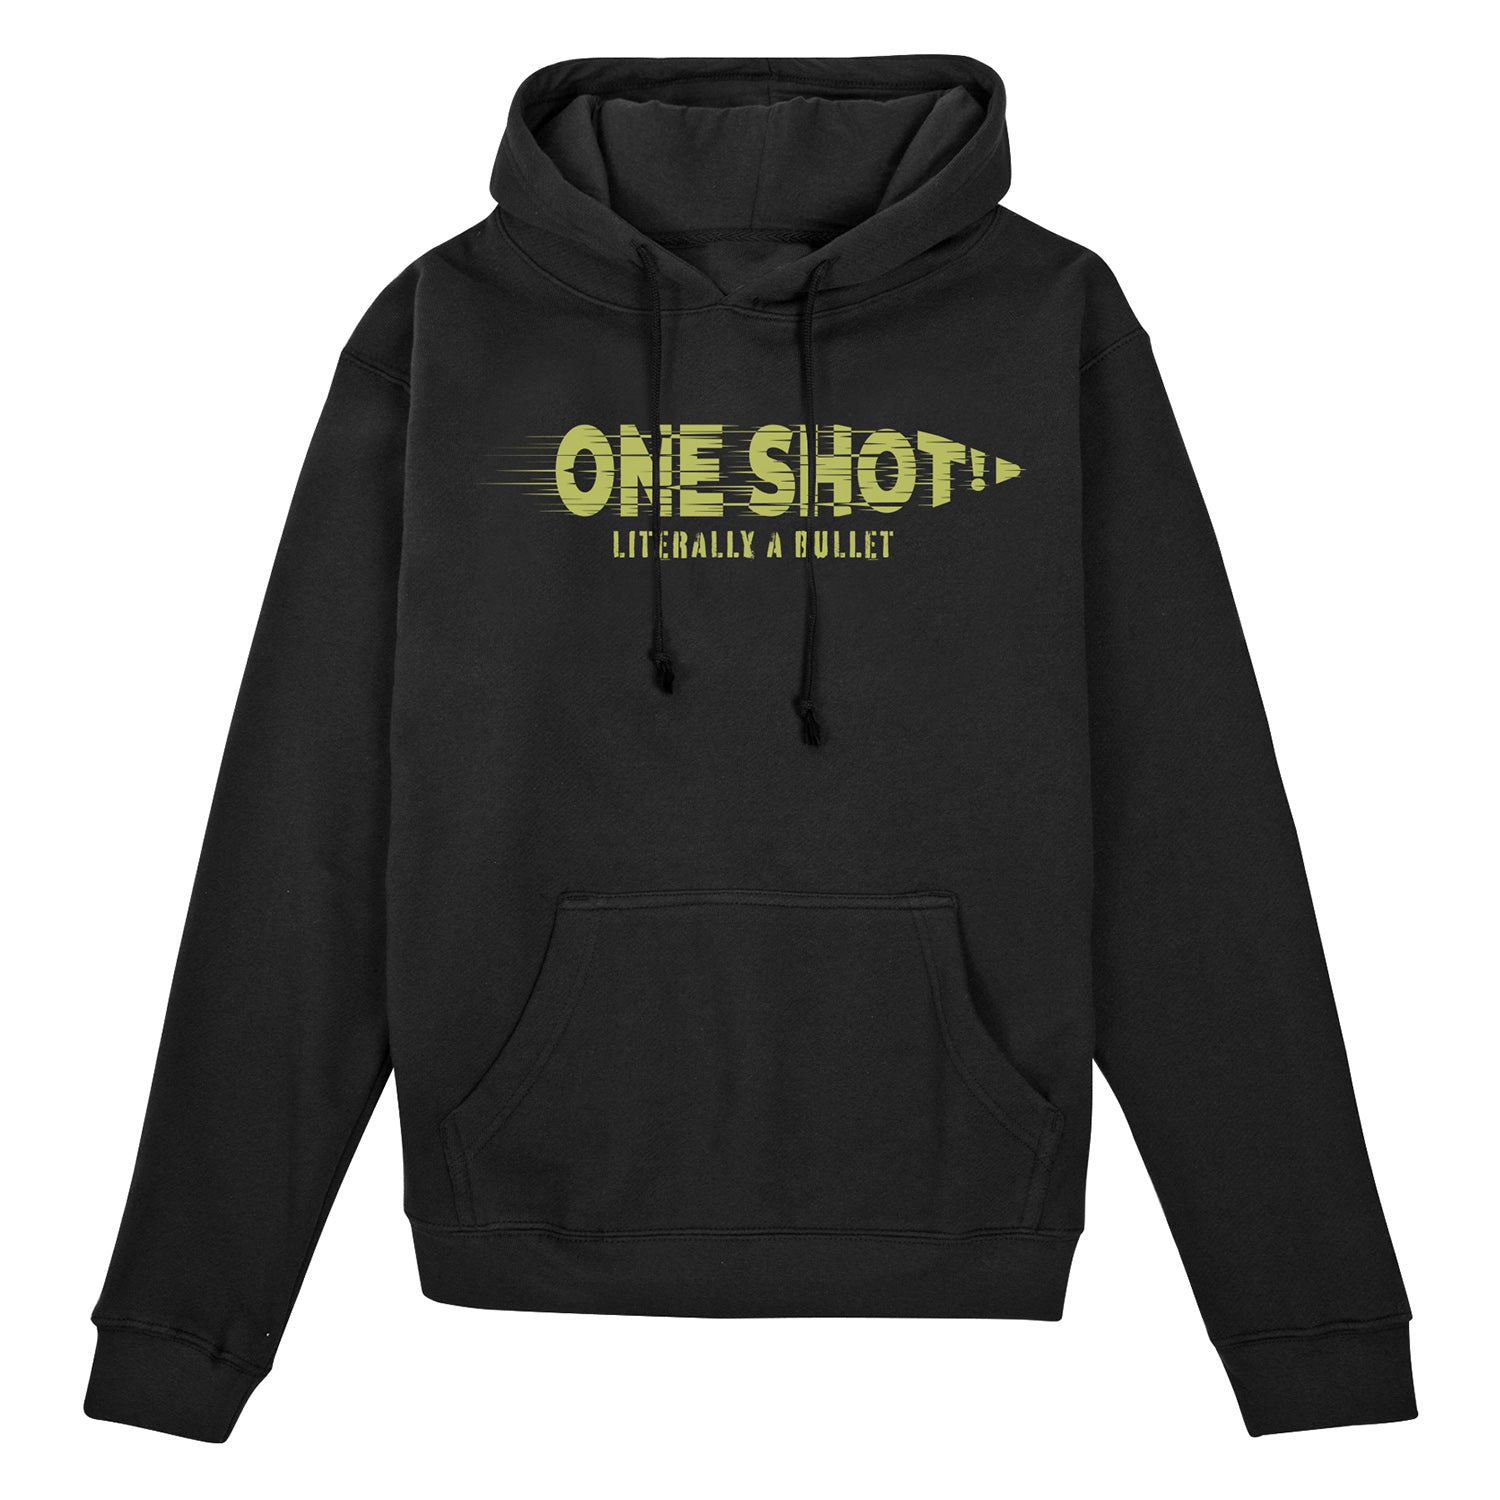 Call of Duty One Shot Black Hoodie - Front View